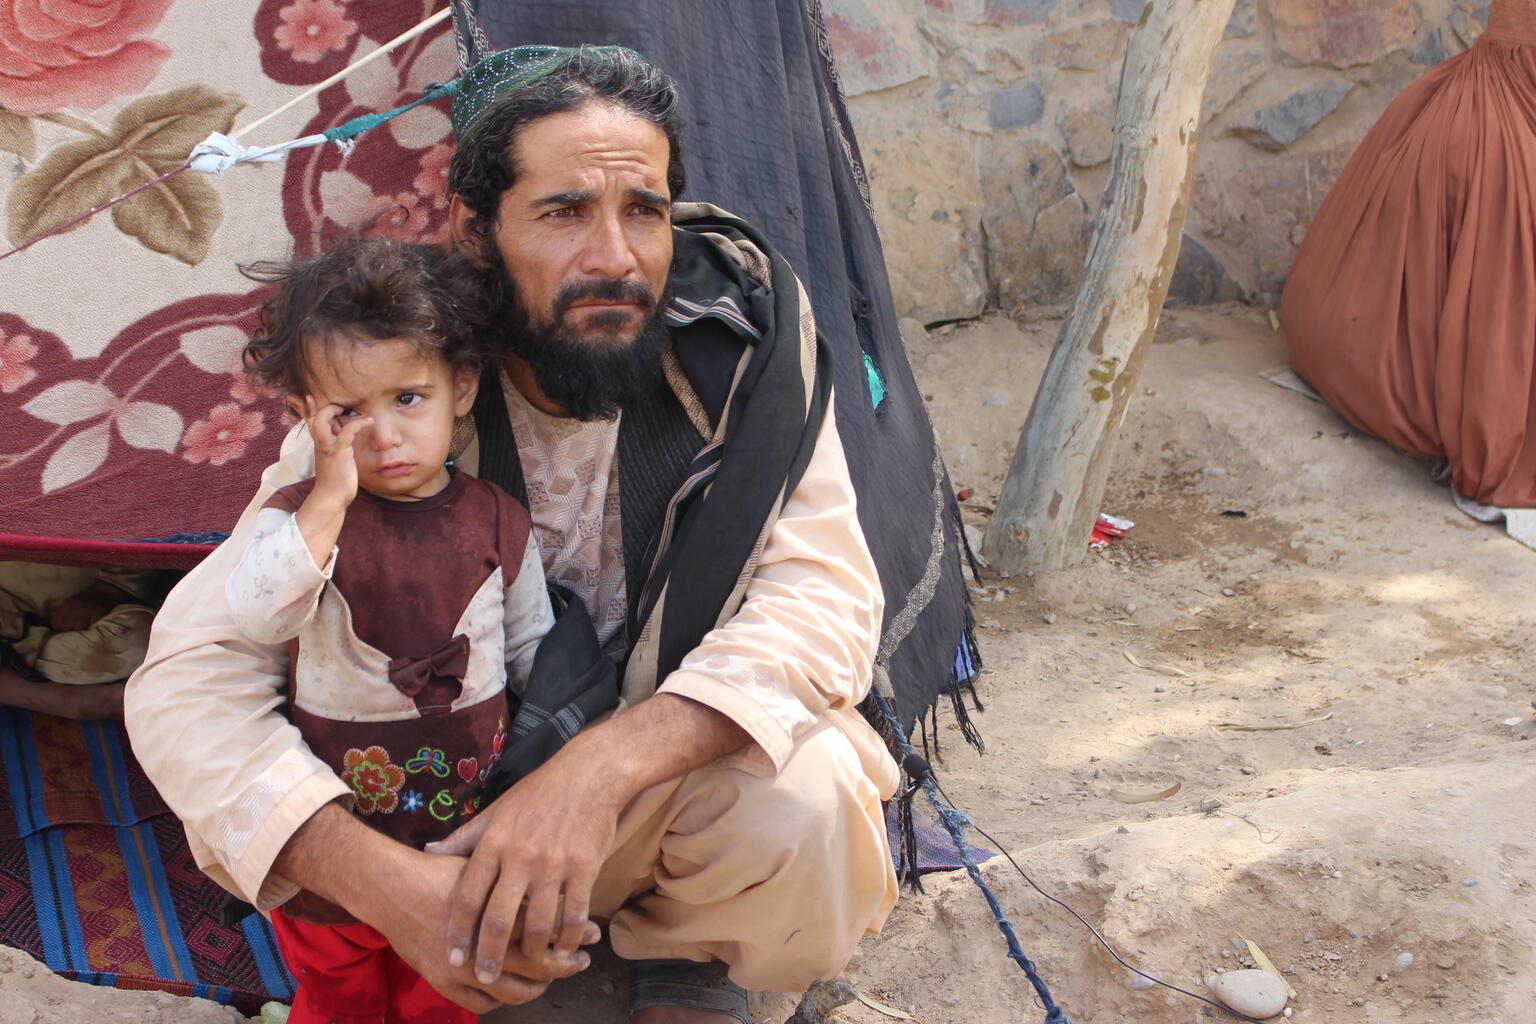 A child and her father in Afghanistan.